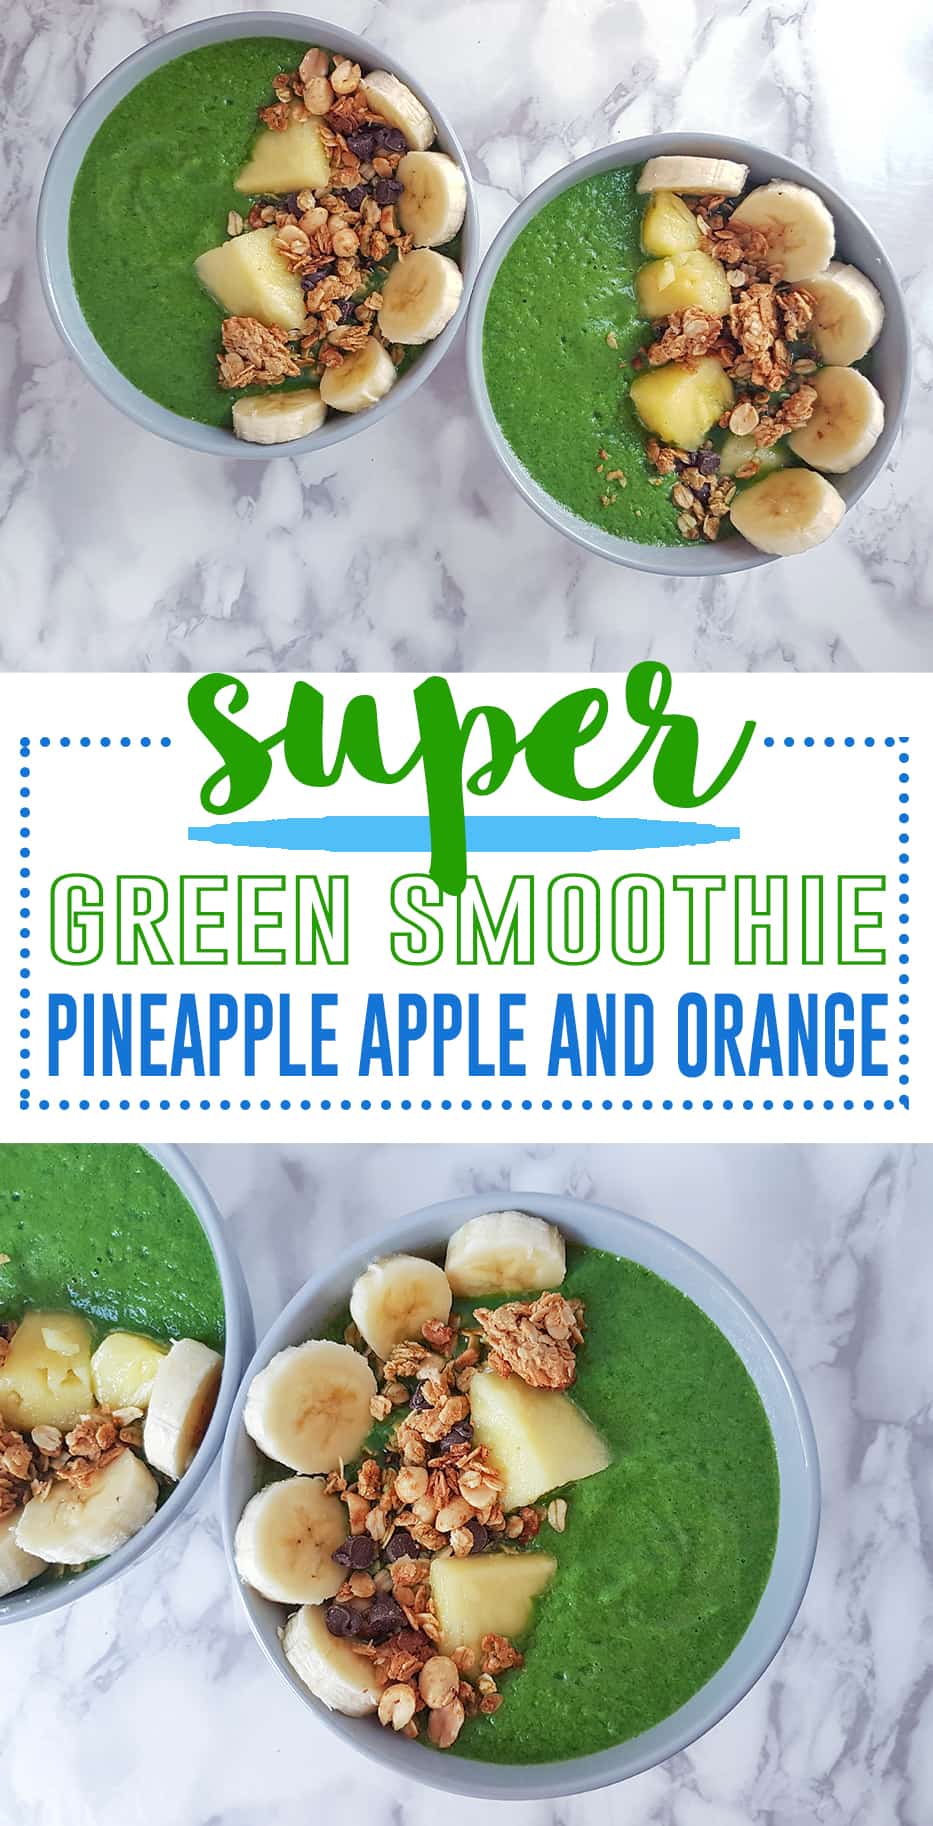 Pineapple Apple and Orange Super Green Smoothie